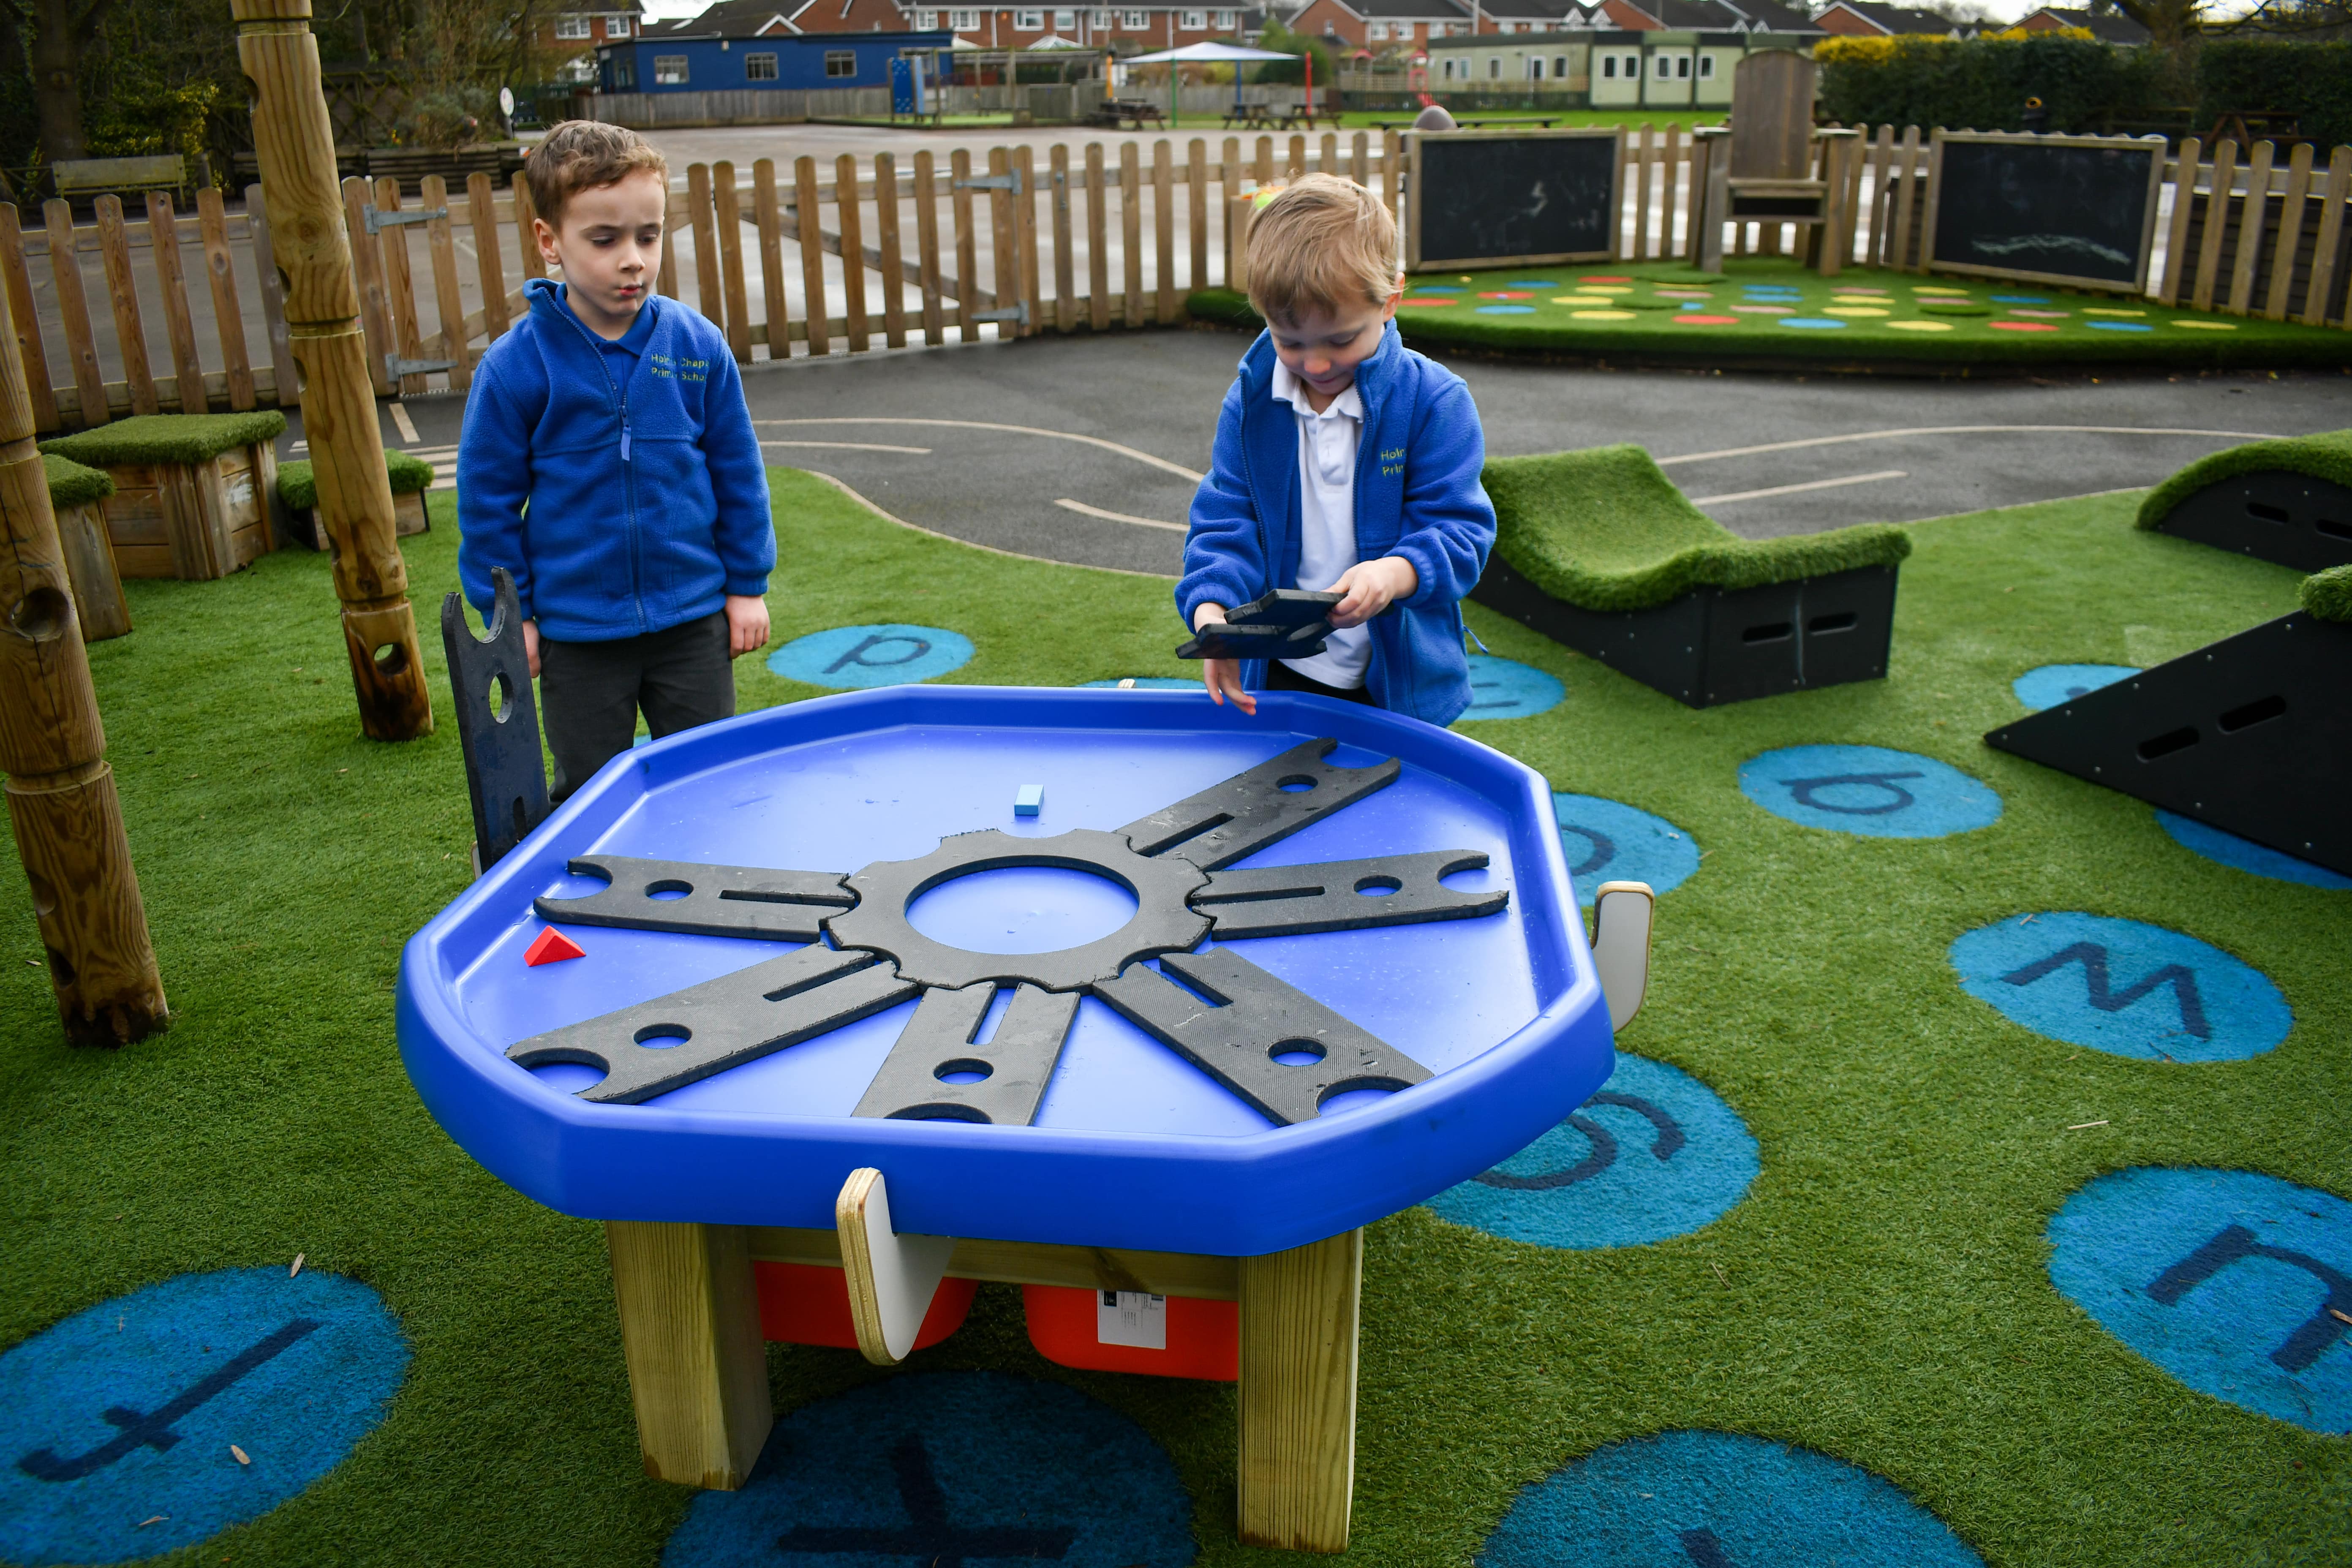 two children are stood around a Tuff table, placing puzzle piece within it. The surrounding area shows some Get Set, Go! Blocks and other playground markings,